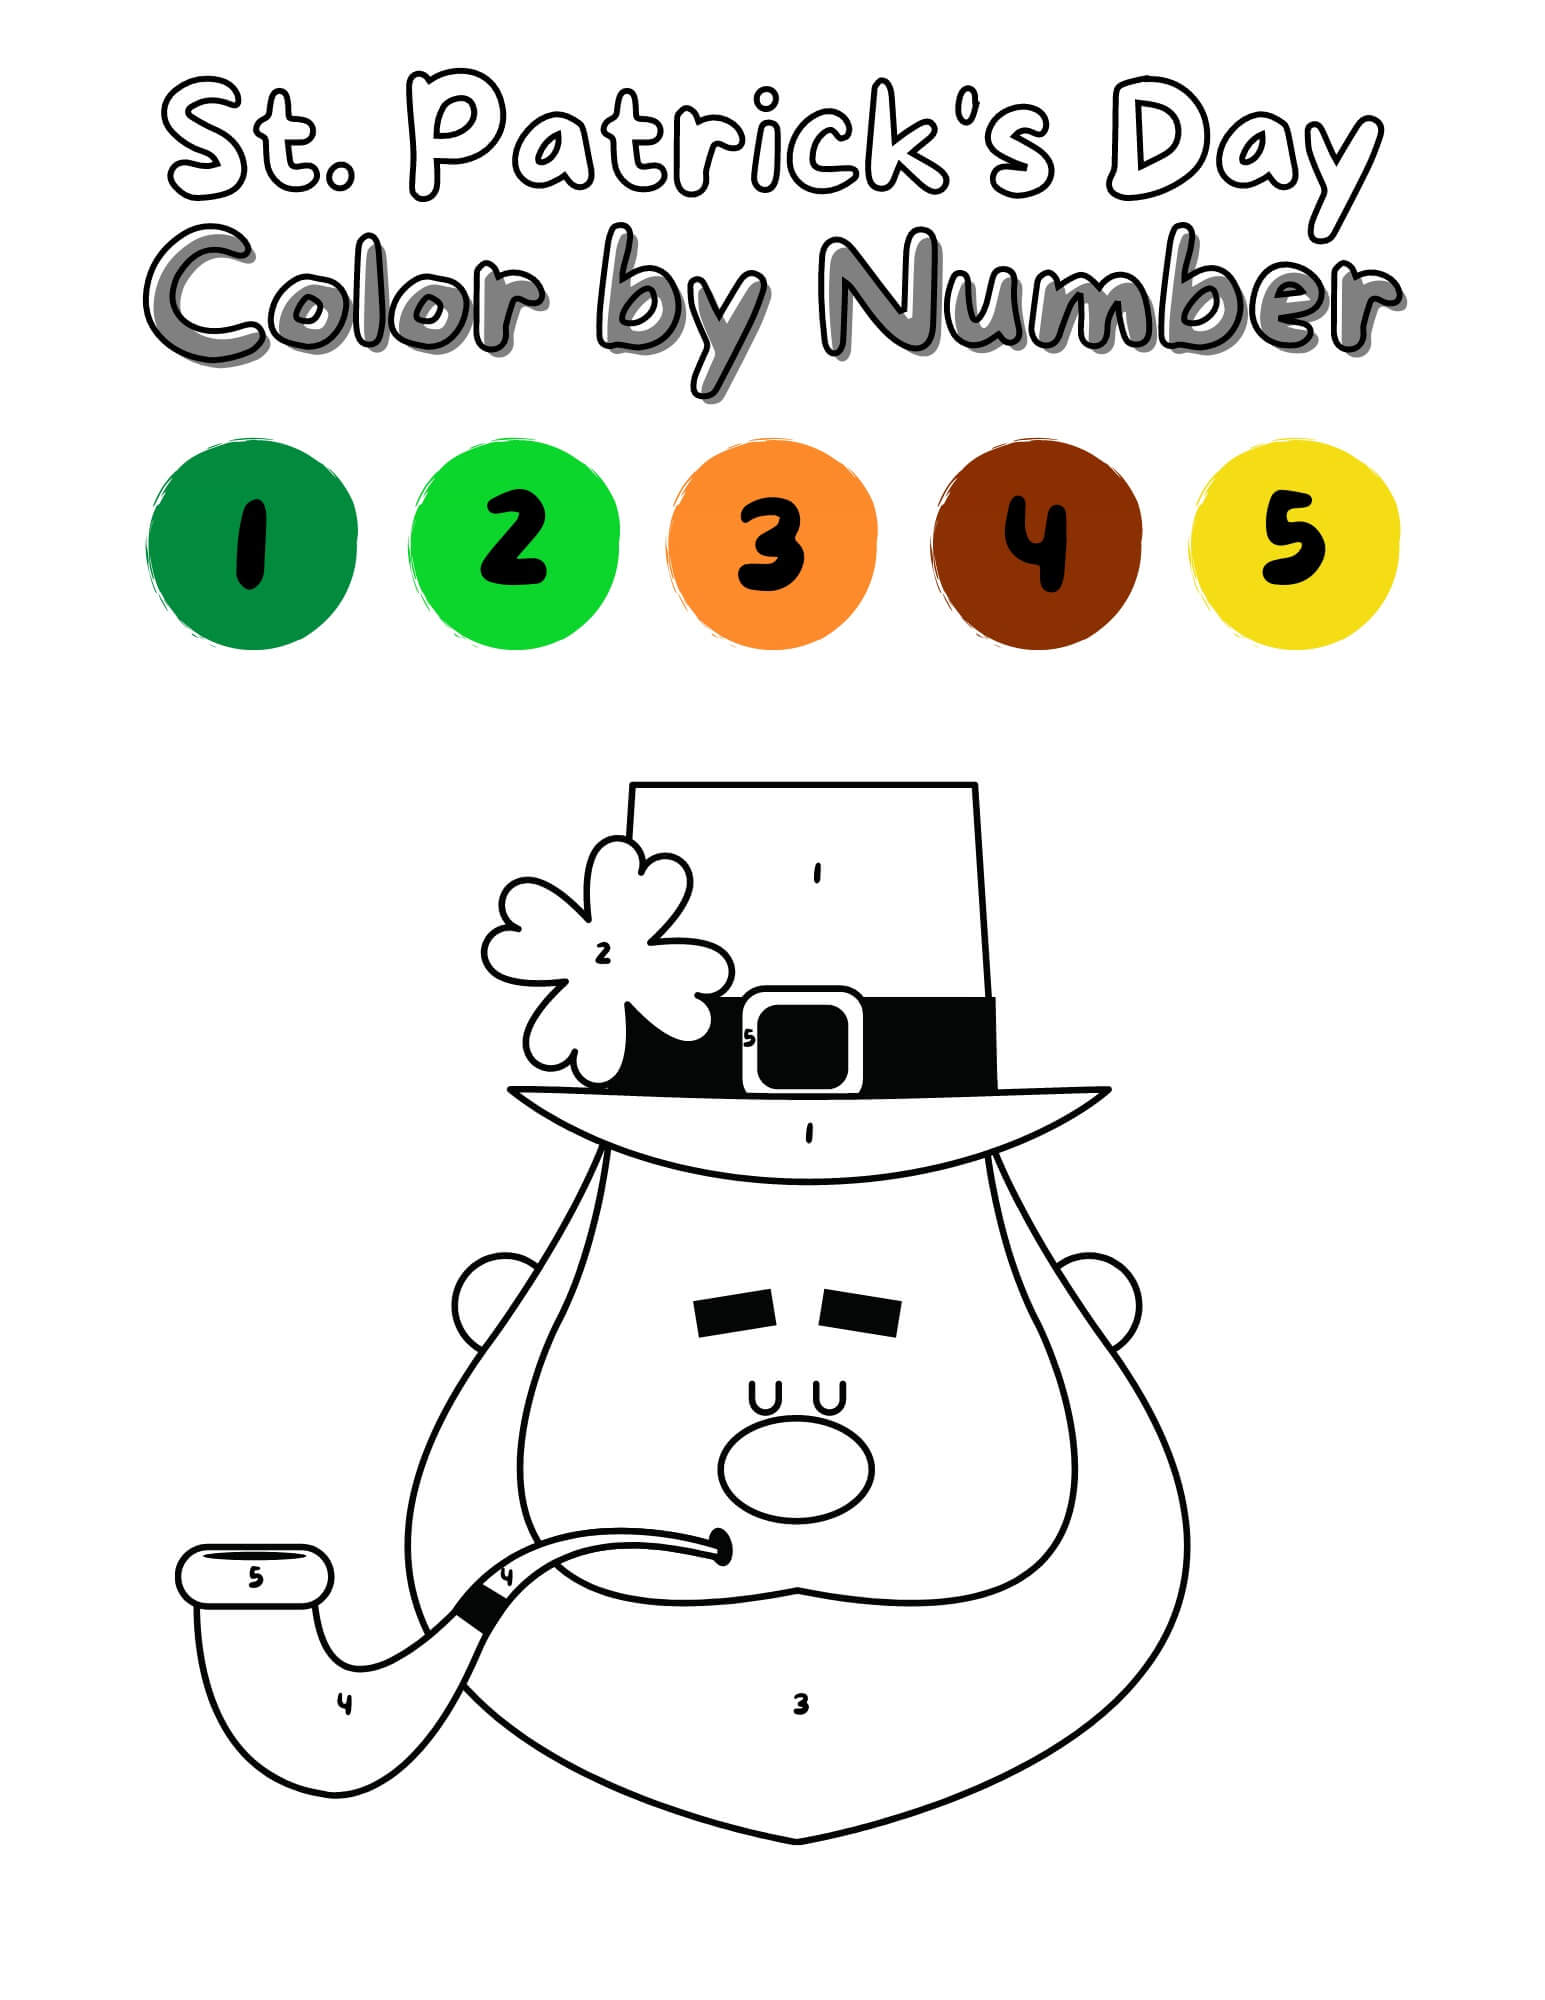 Lovely St Patrick's Day Color By Number - Download, Print Now!